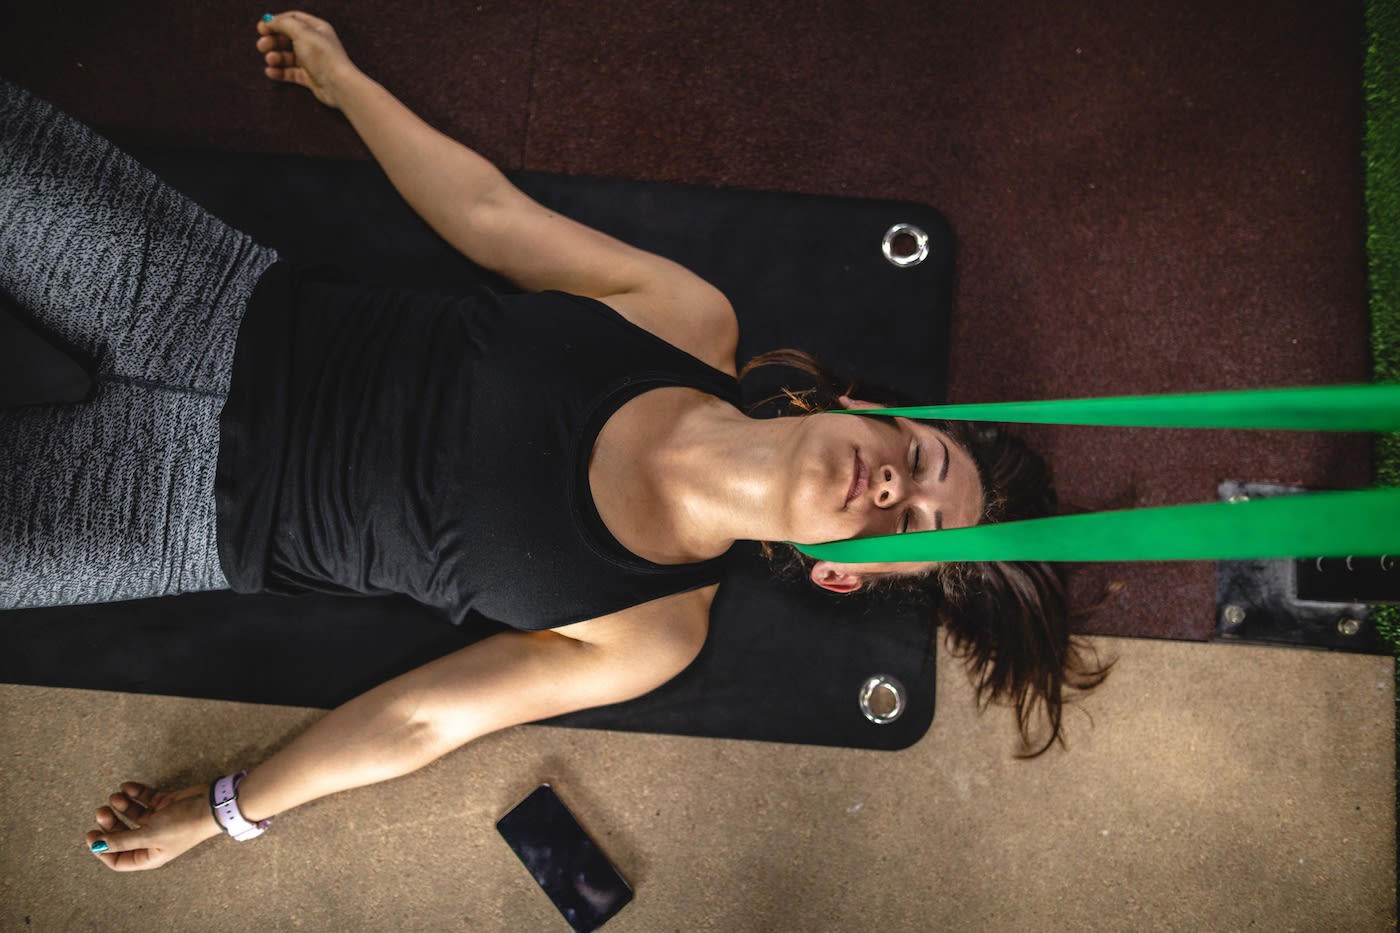 All you need is a towel and a resistance band for this 5-minute neck decompression stretch